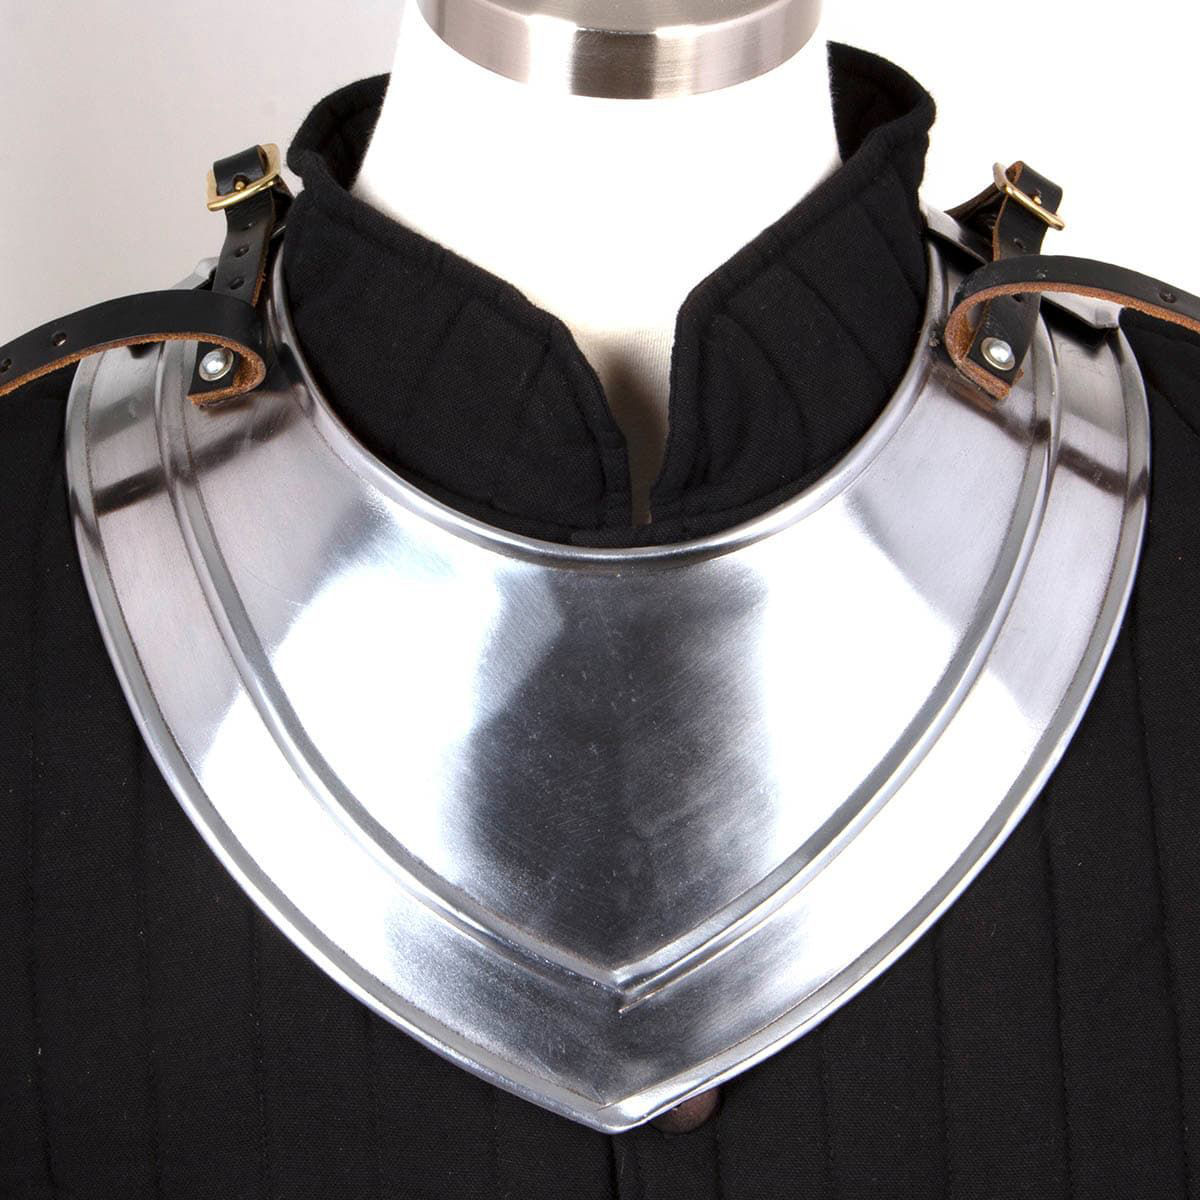 18 gauge steel medieval gorget for upper shoulder protection has 2 sets of adjustable leather straps, made by Noble Armoury